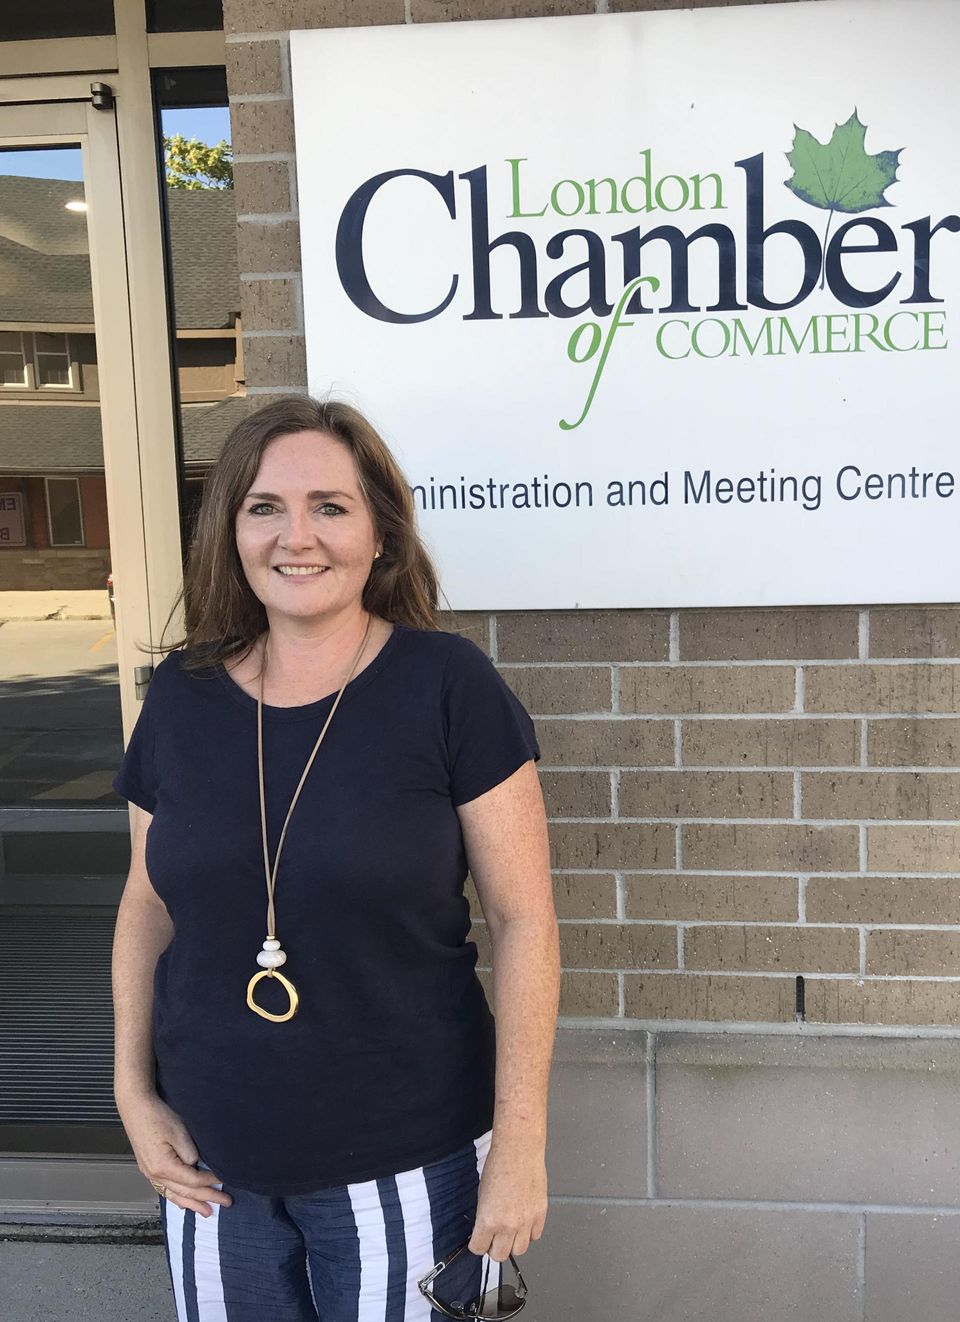 Nicole Laidler standing in front of the London Chamber of Commerce